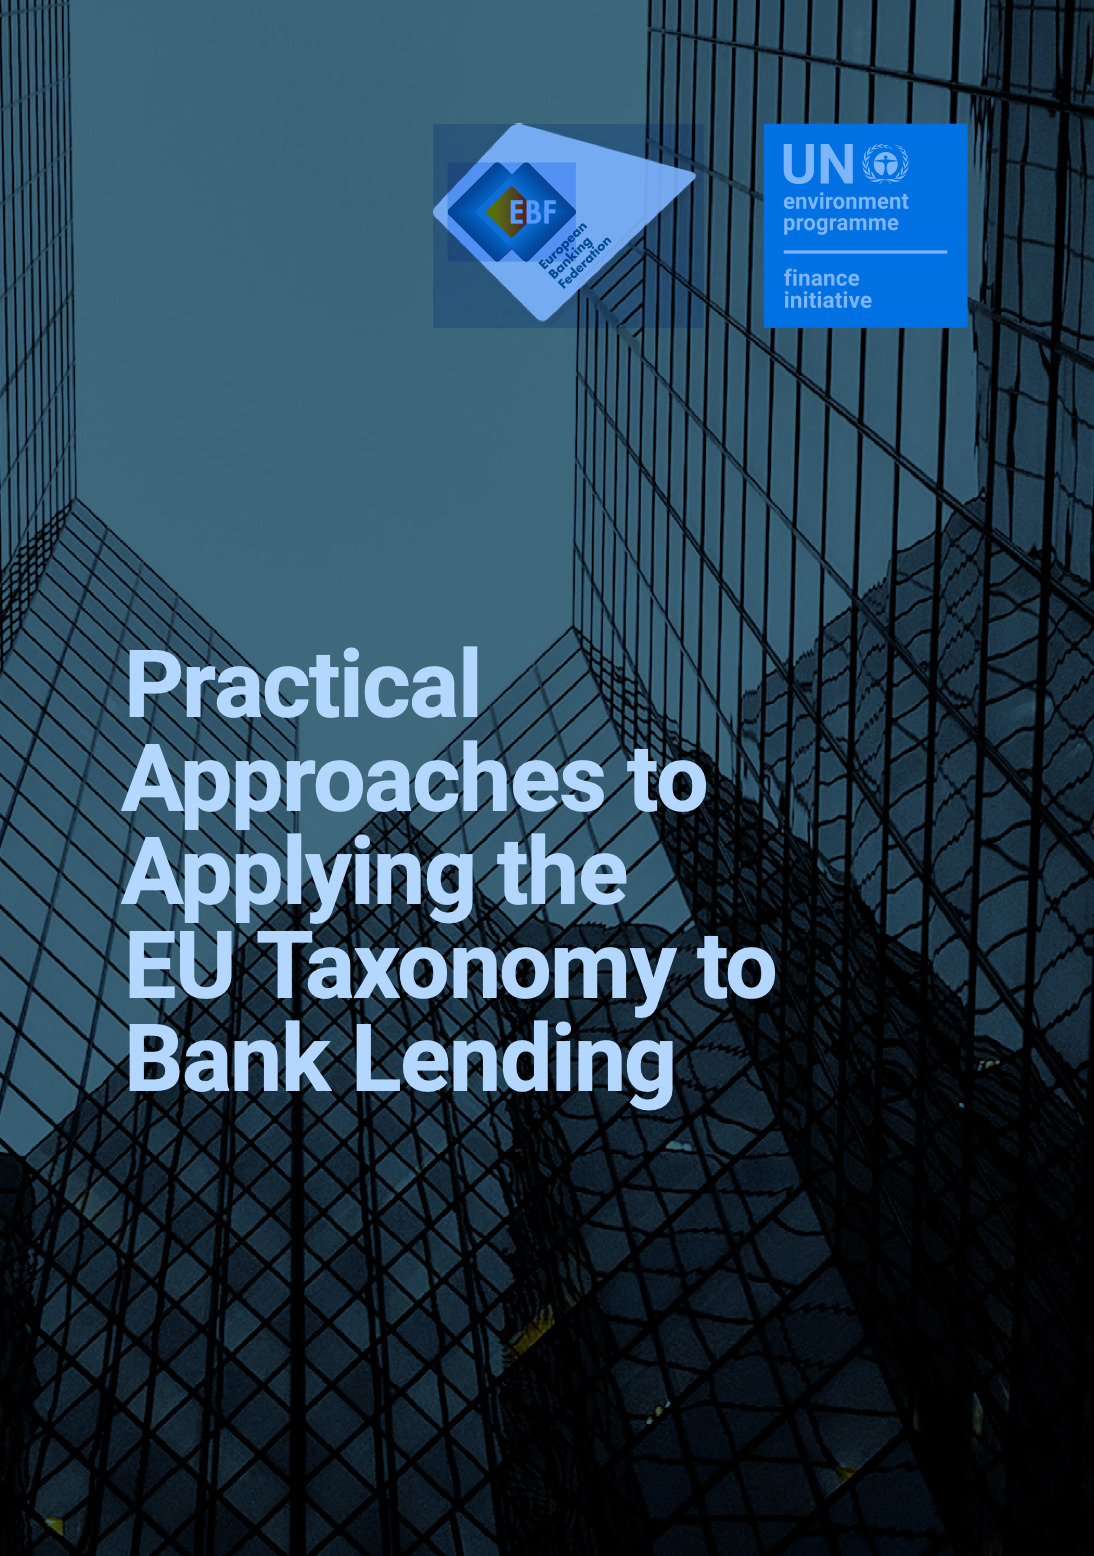 Practical approaches applying the EU Taxonomy to bank lending